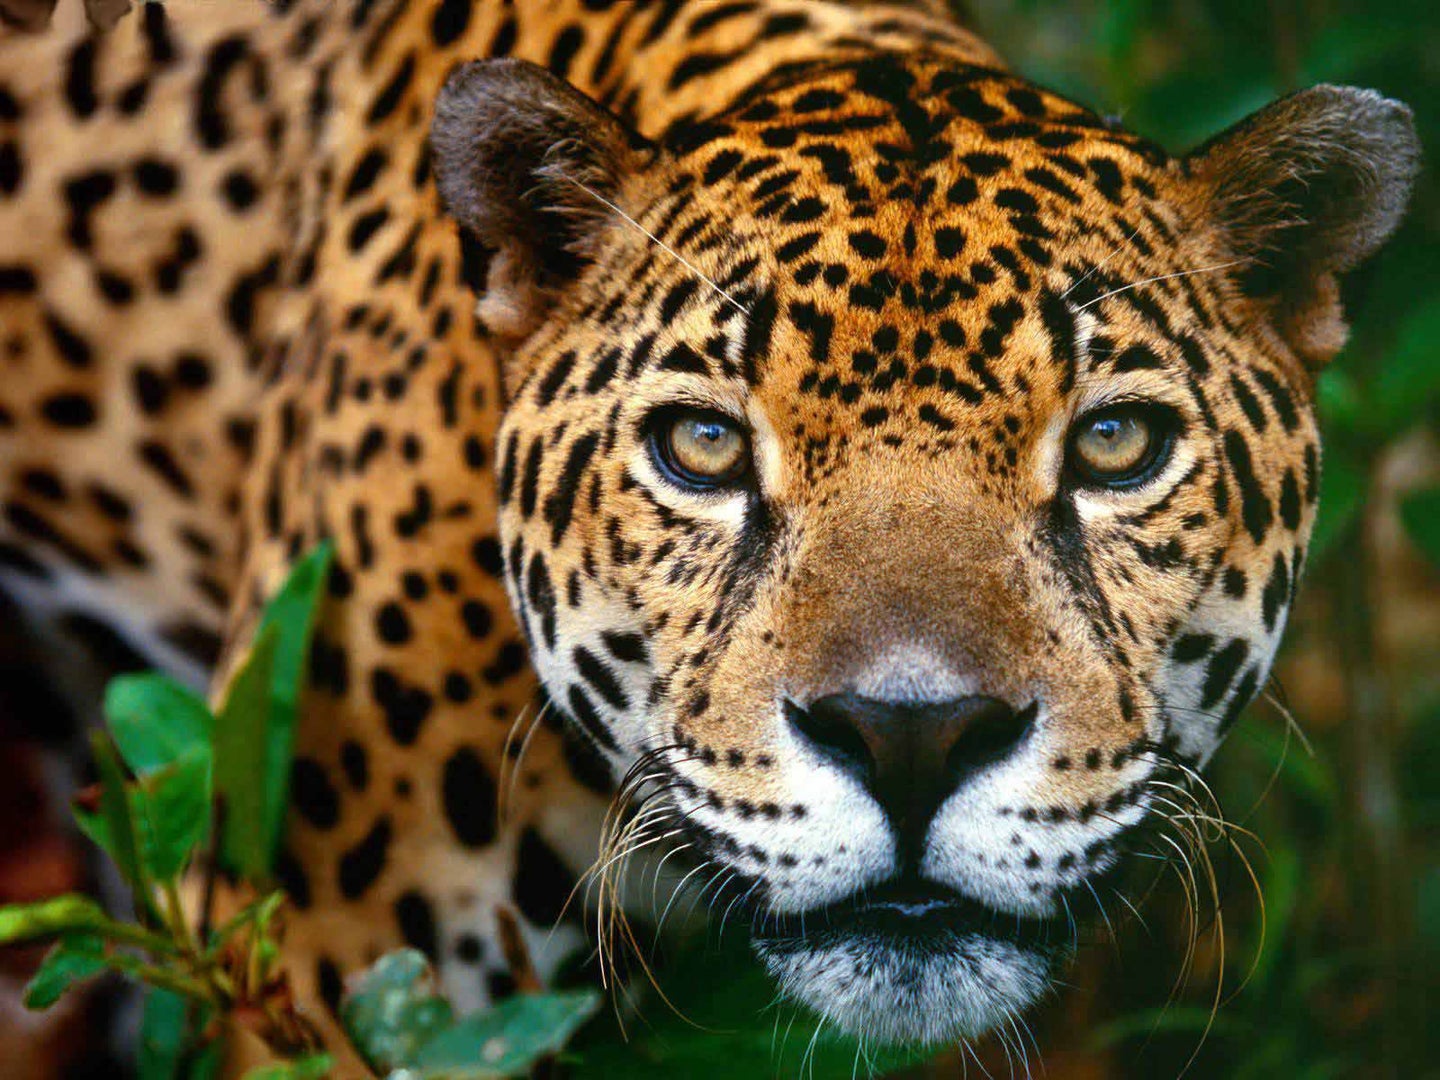 Mexico's jaguars are being marketed as Latin Tigers in China. 